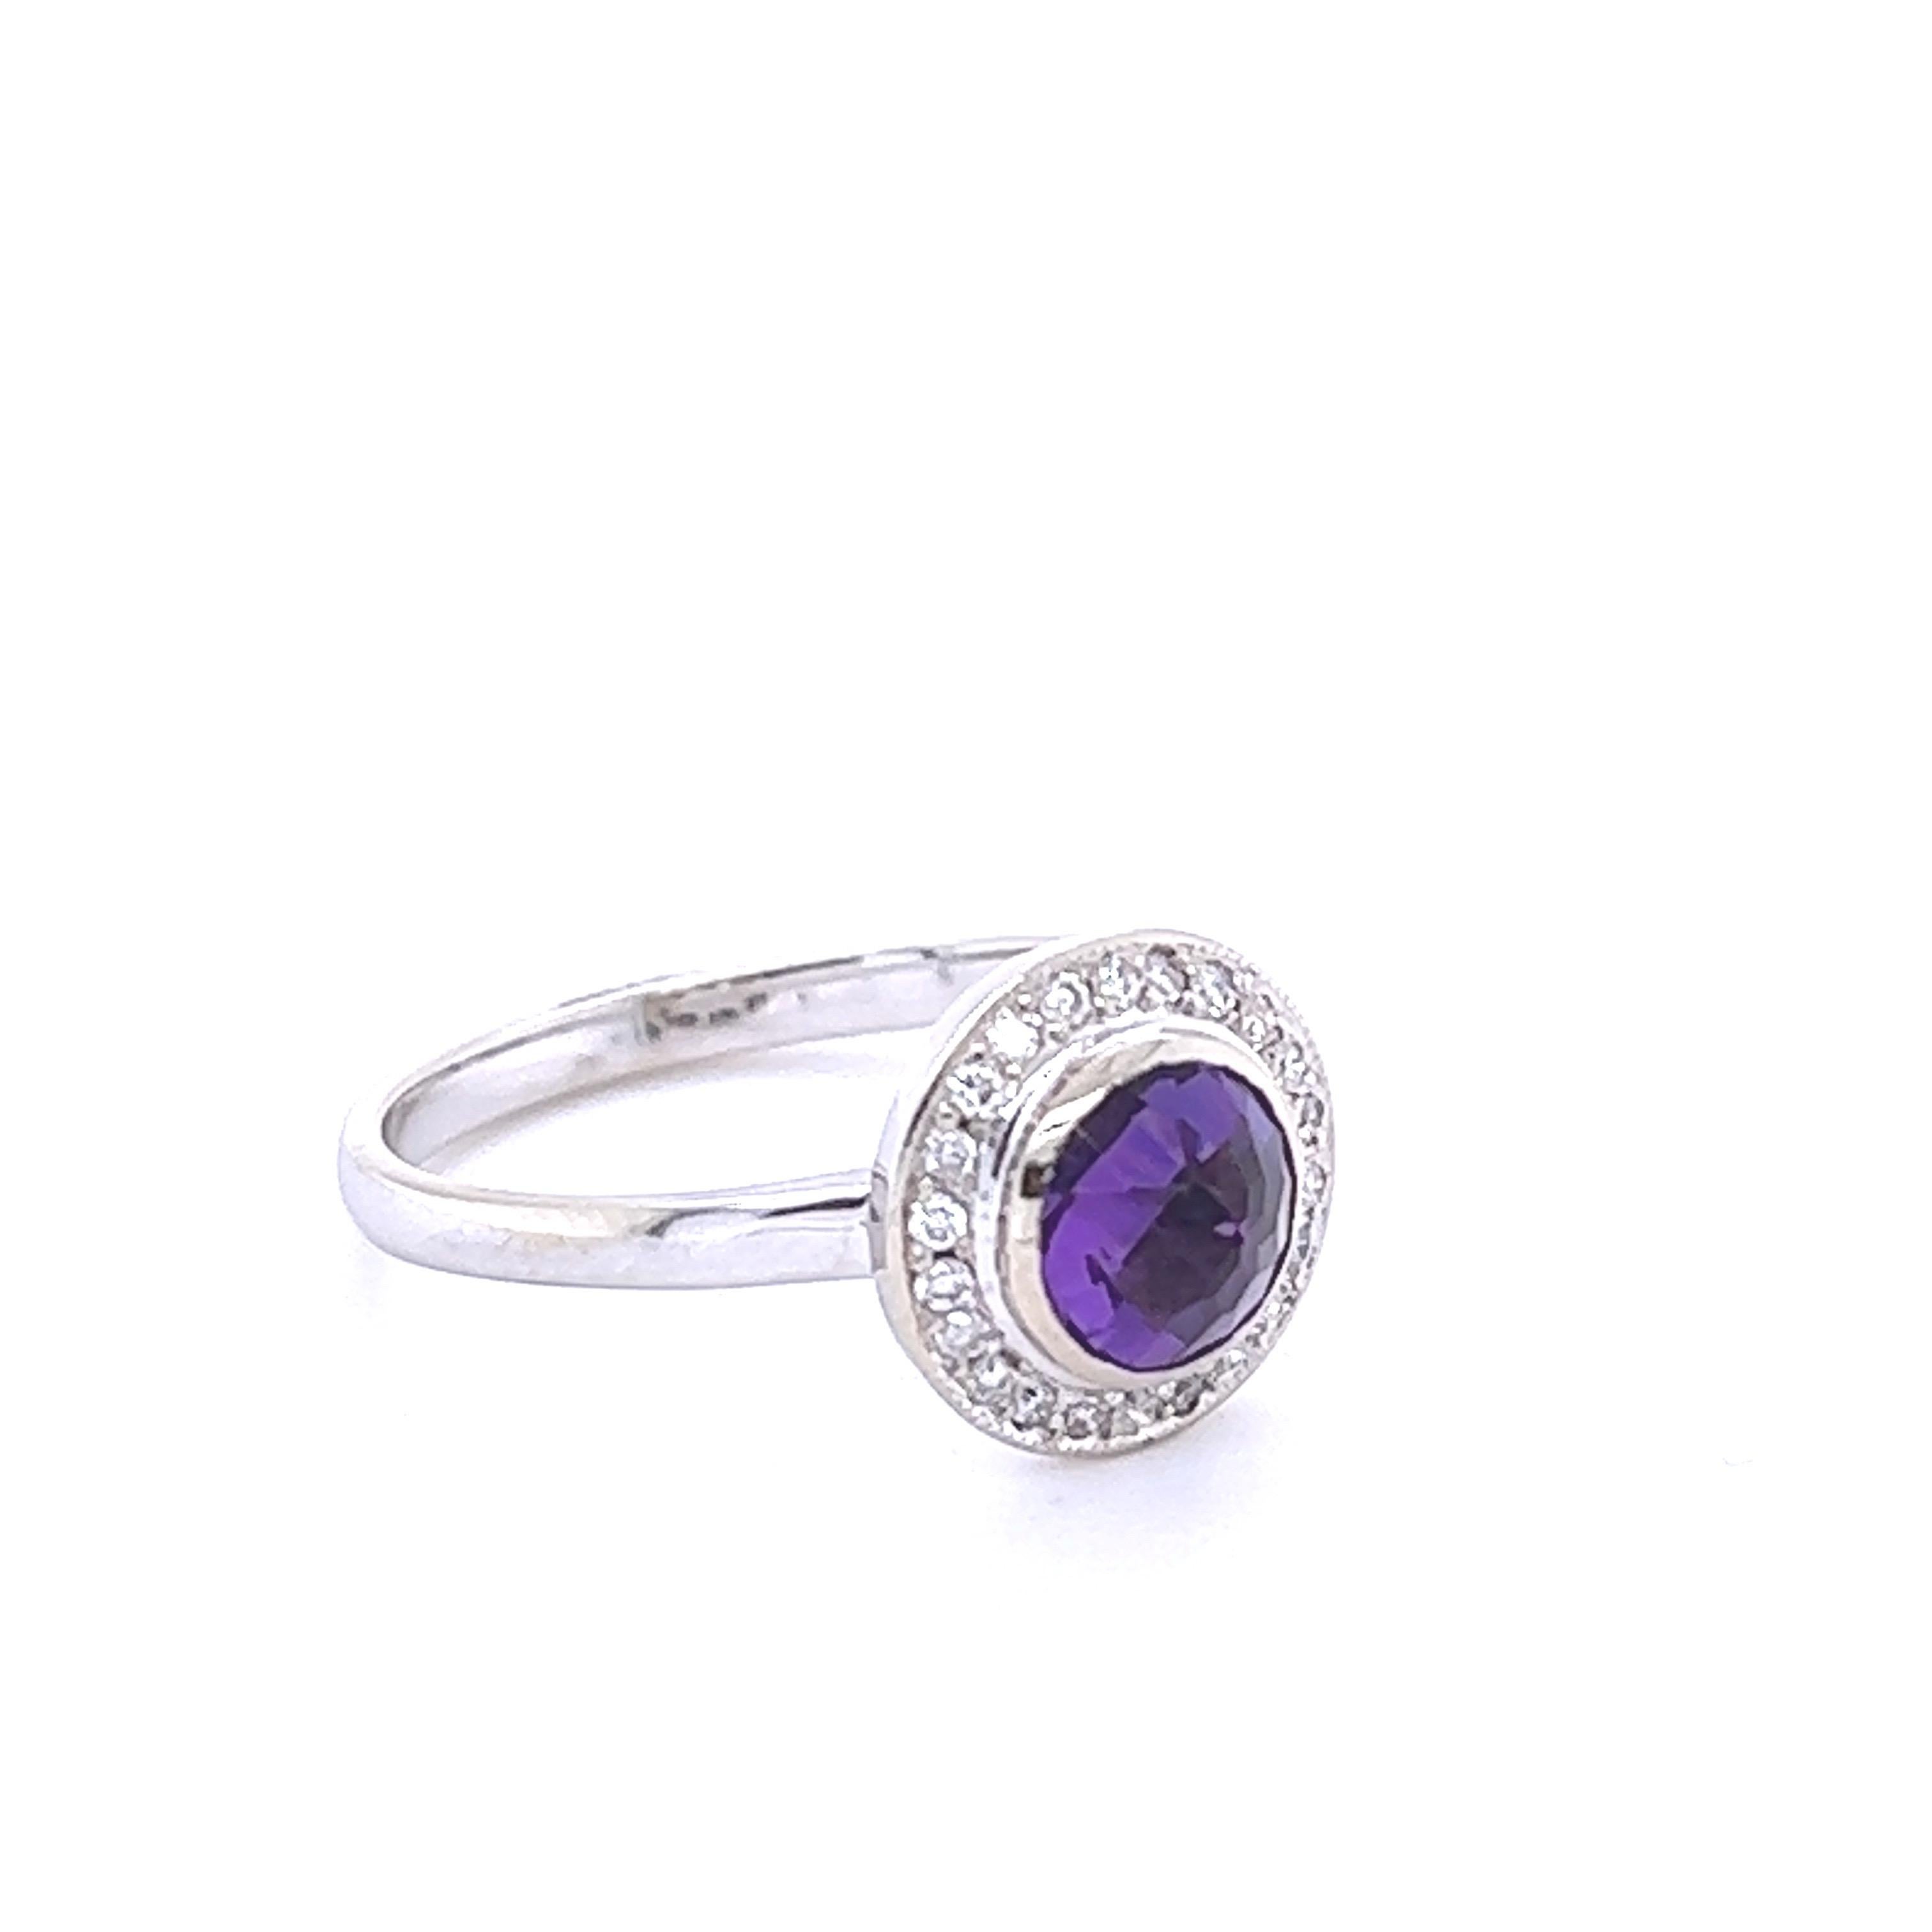 This beautiful ring has a 0.78 carat Round Cut Amethyst set in the center and is surrounded by 23 Round Cut Diamonds that weigh 0.15 carats. The total weight of the ring is 0.93 carats. The center Amethyst measures at approximately 5.5 mm. The ring